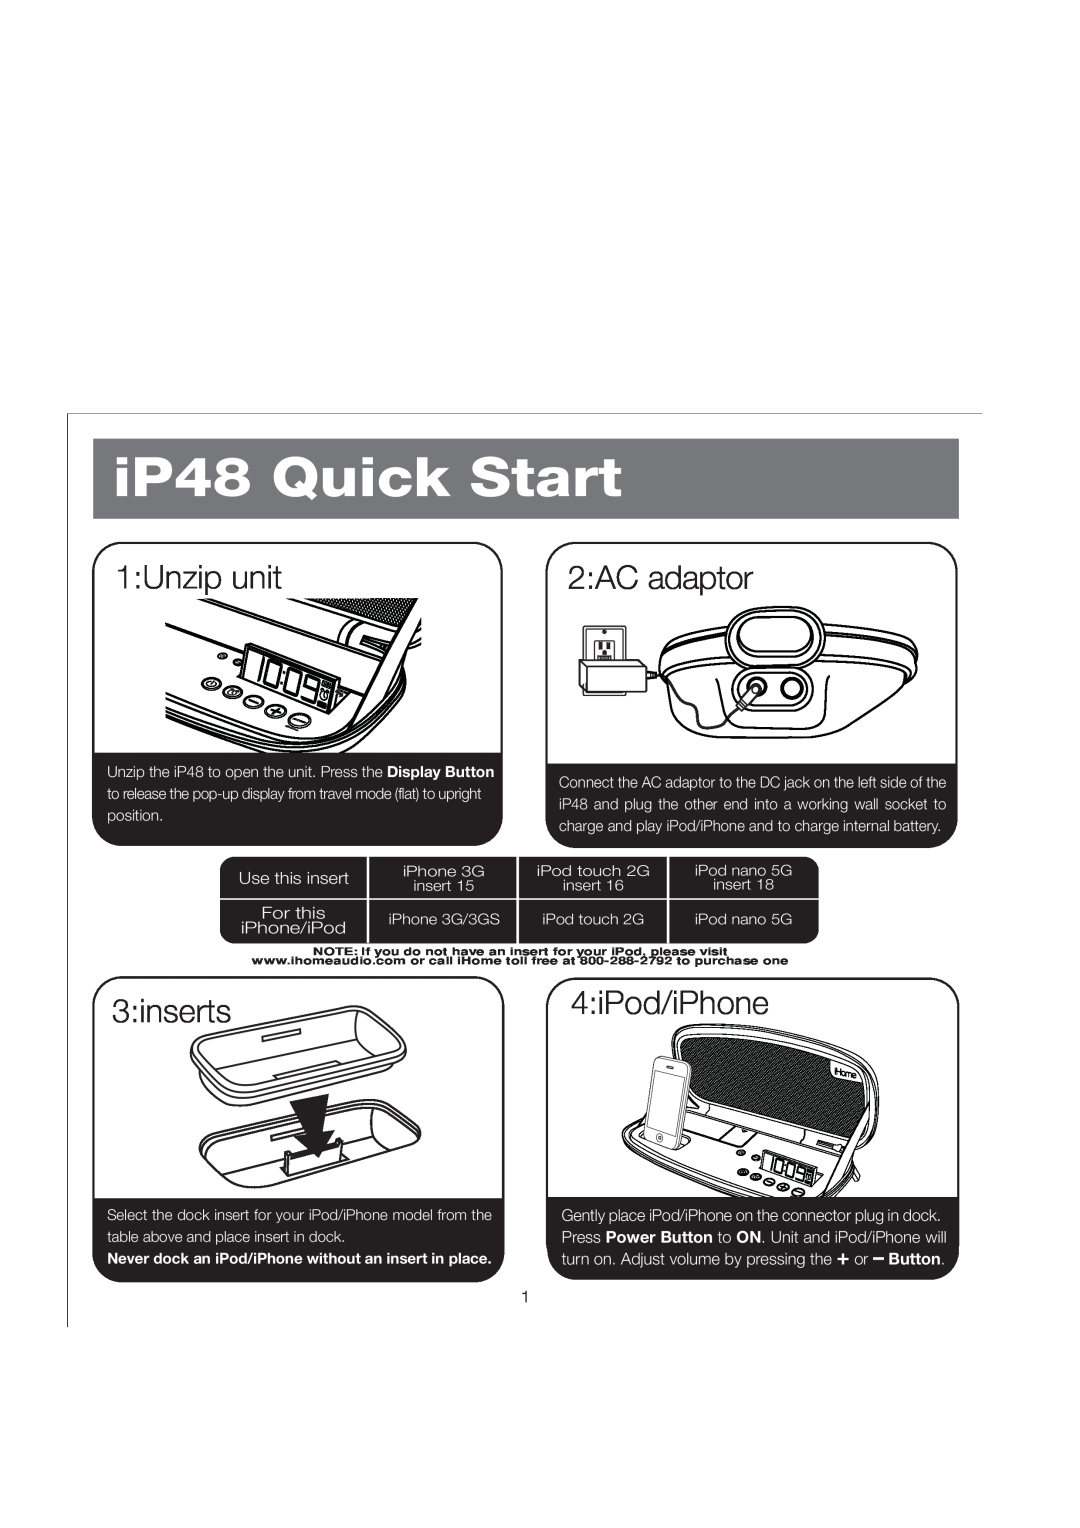 iHome IP48 manual iP48 QuickStart, 1:Unzip unit, inserts4 iPod/iPhone, 2:AC adaptor, Use this insert, For this, iPhone/iPod 